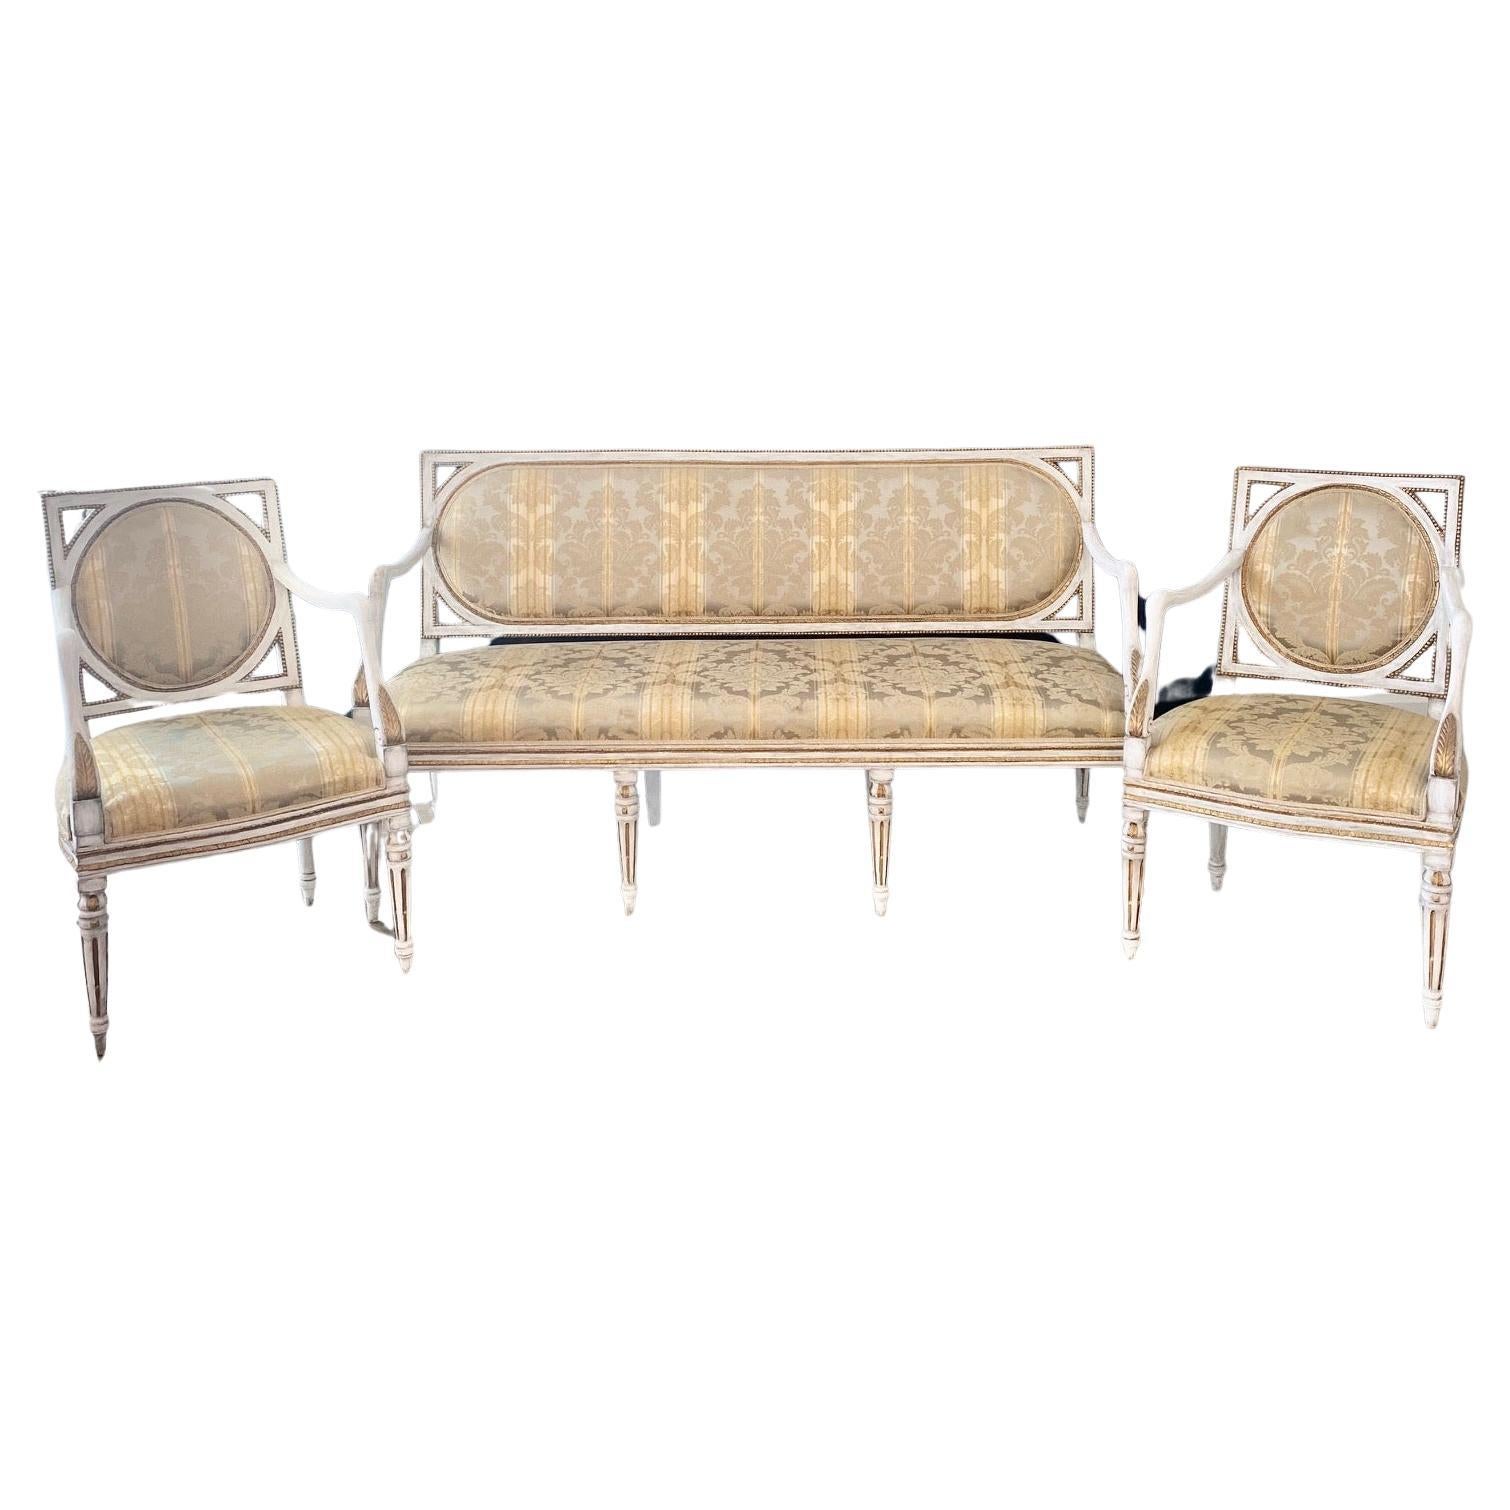 3 Piece Gorgeous 18th Century Louis XVI Salon Set with Sofa and Armchairs For Sale